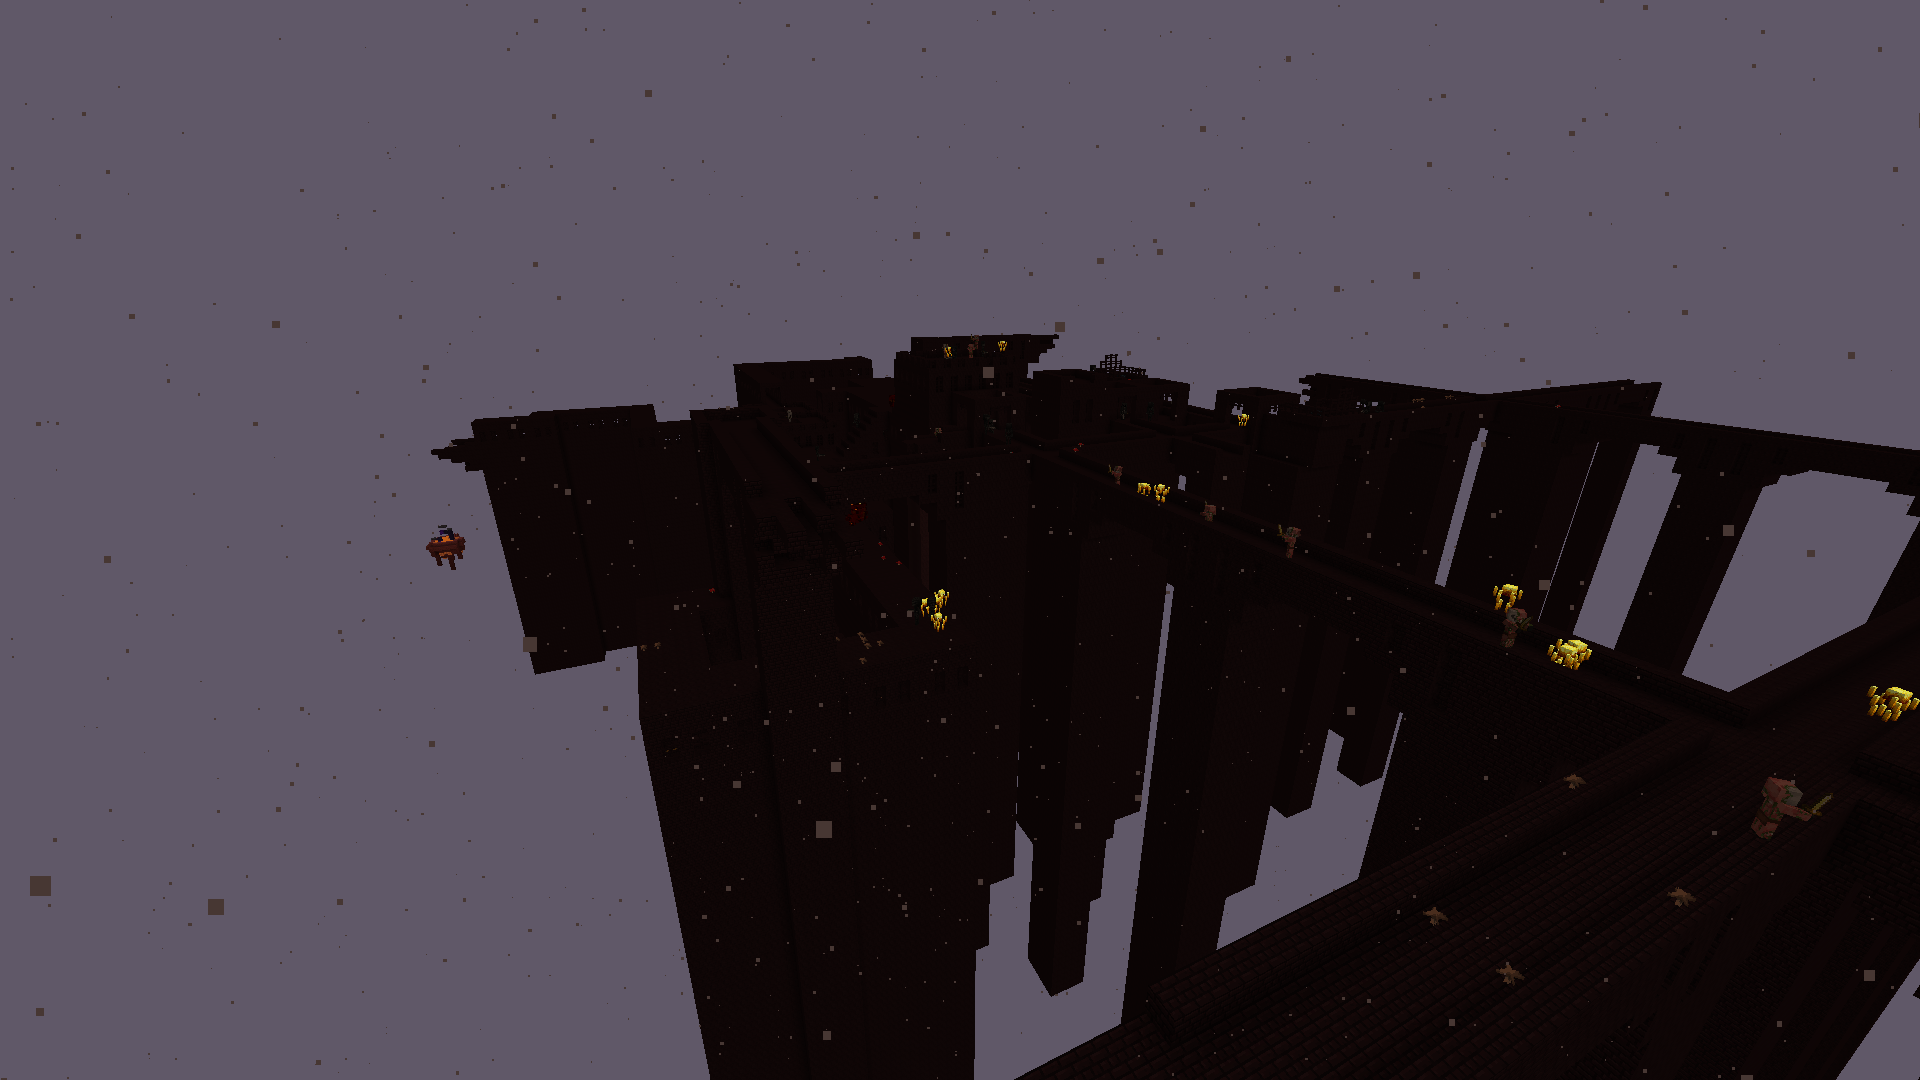 Nether Fortress